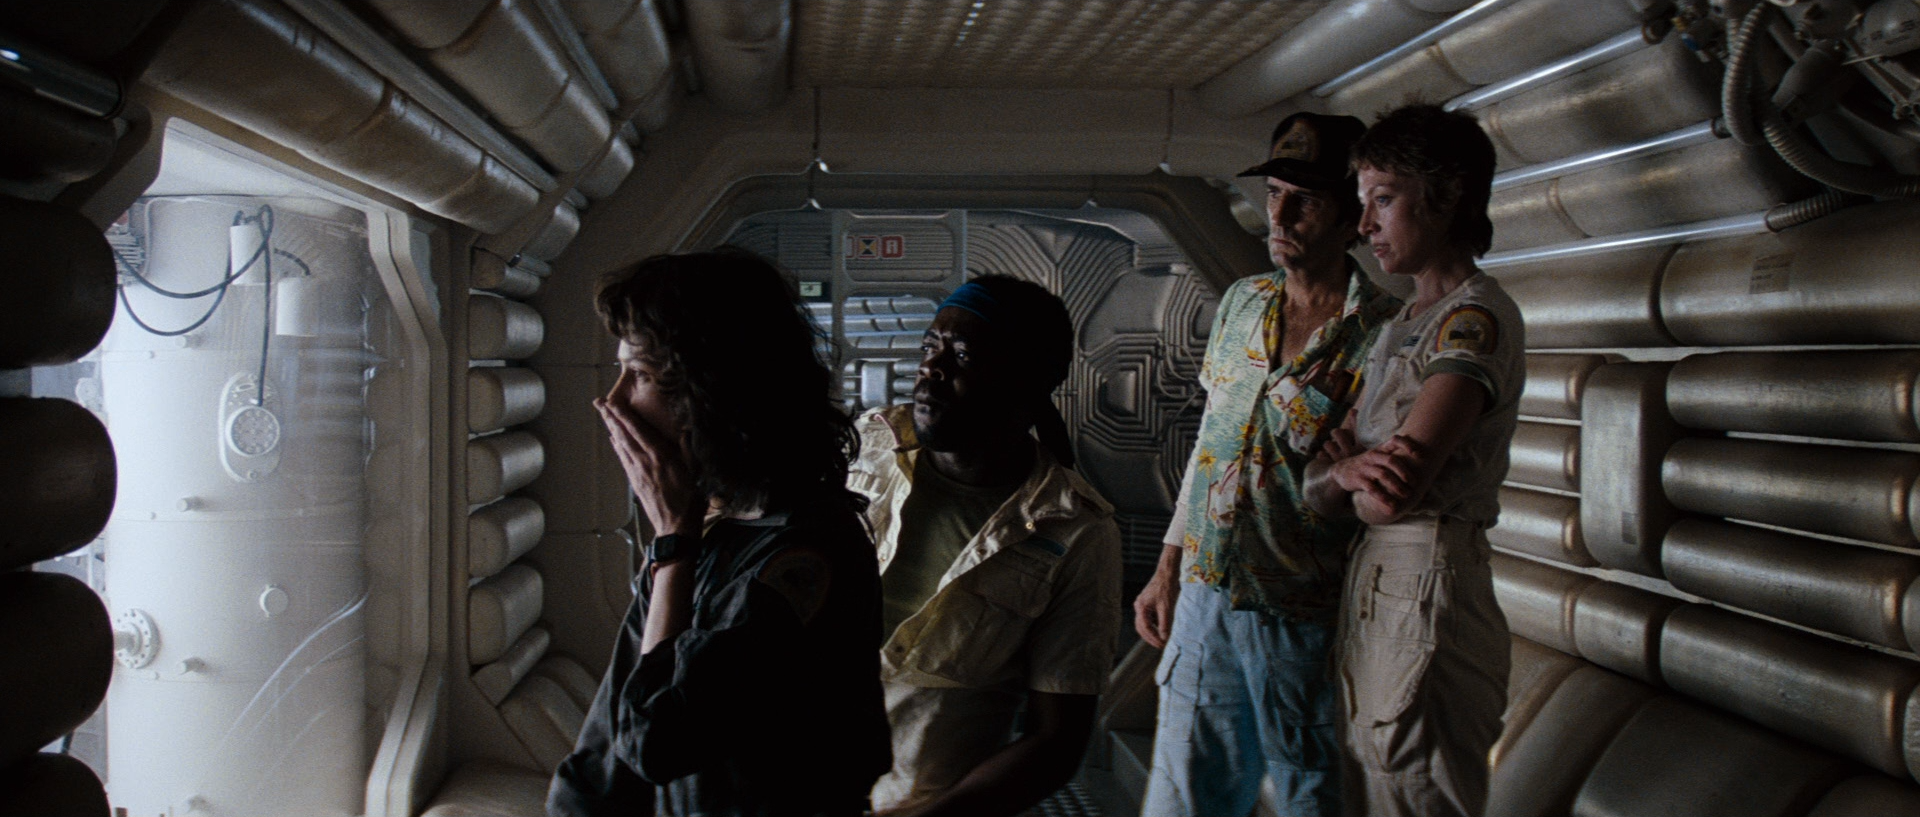 Four casually-dressed crew peer into a room on a space ship, looking shocked and apprehensive